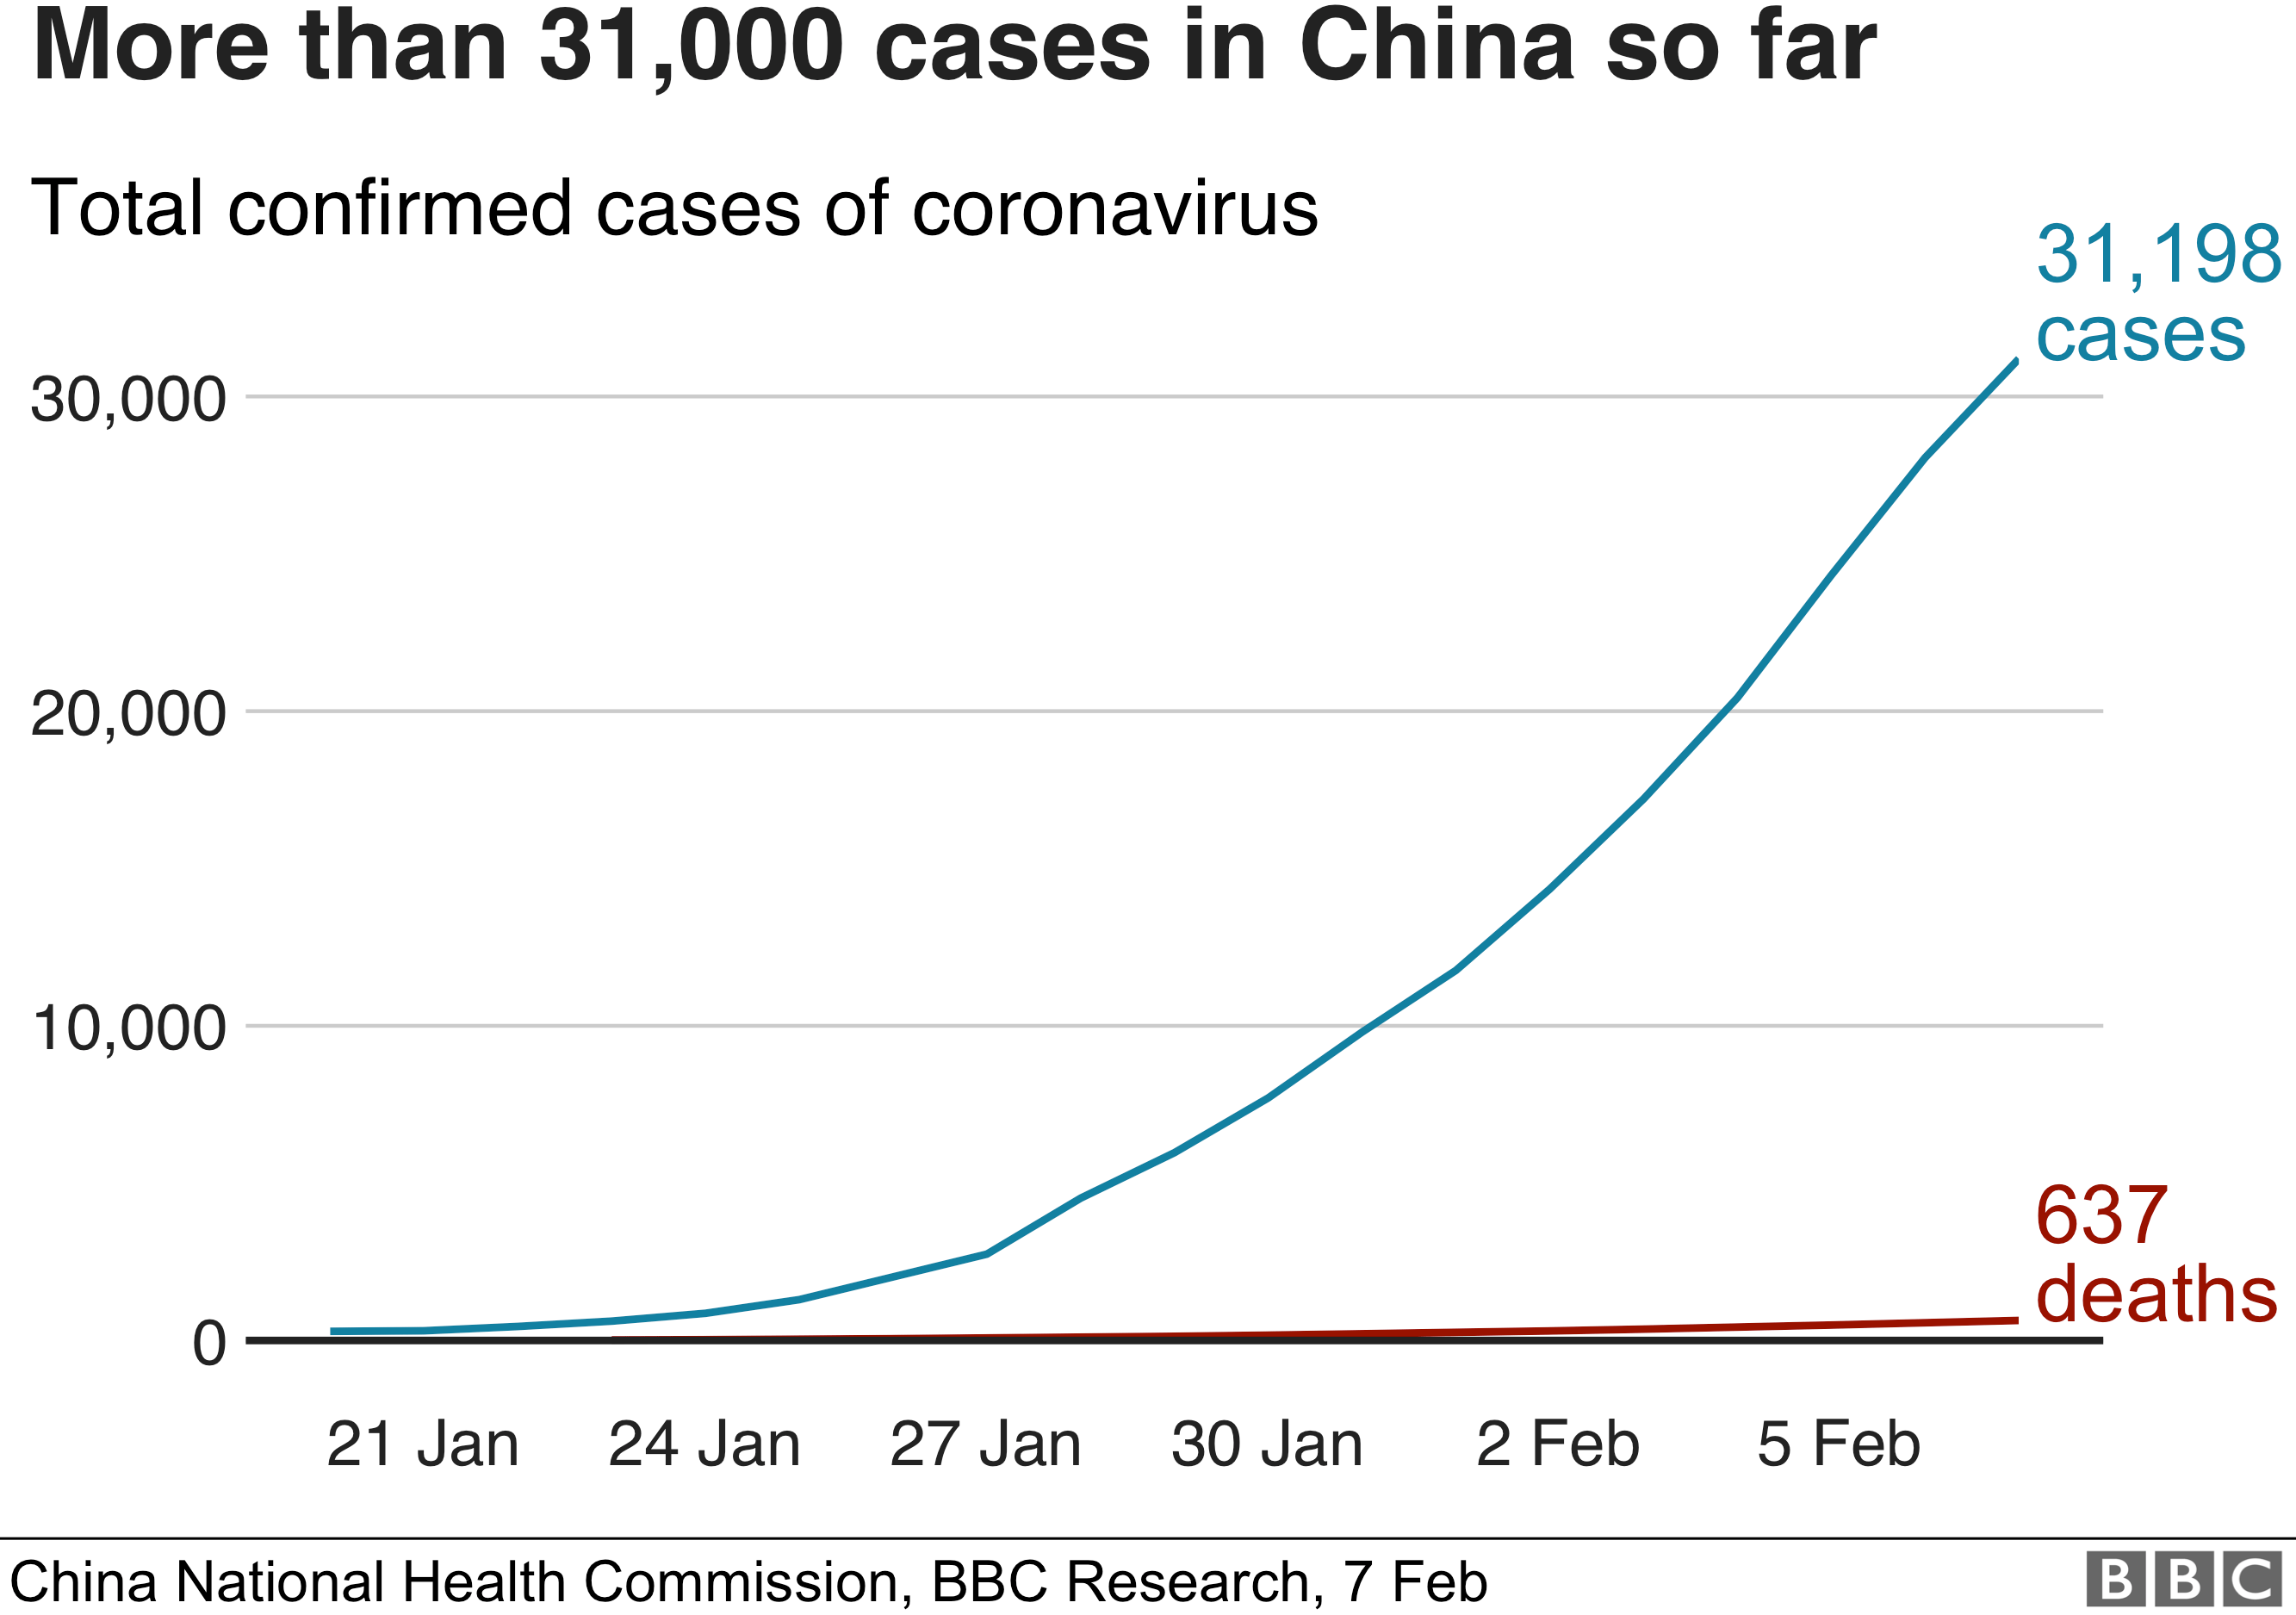 Graphic showing the number of cases in China so far